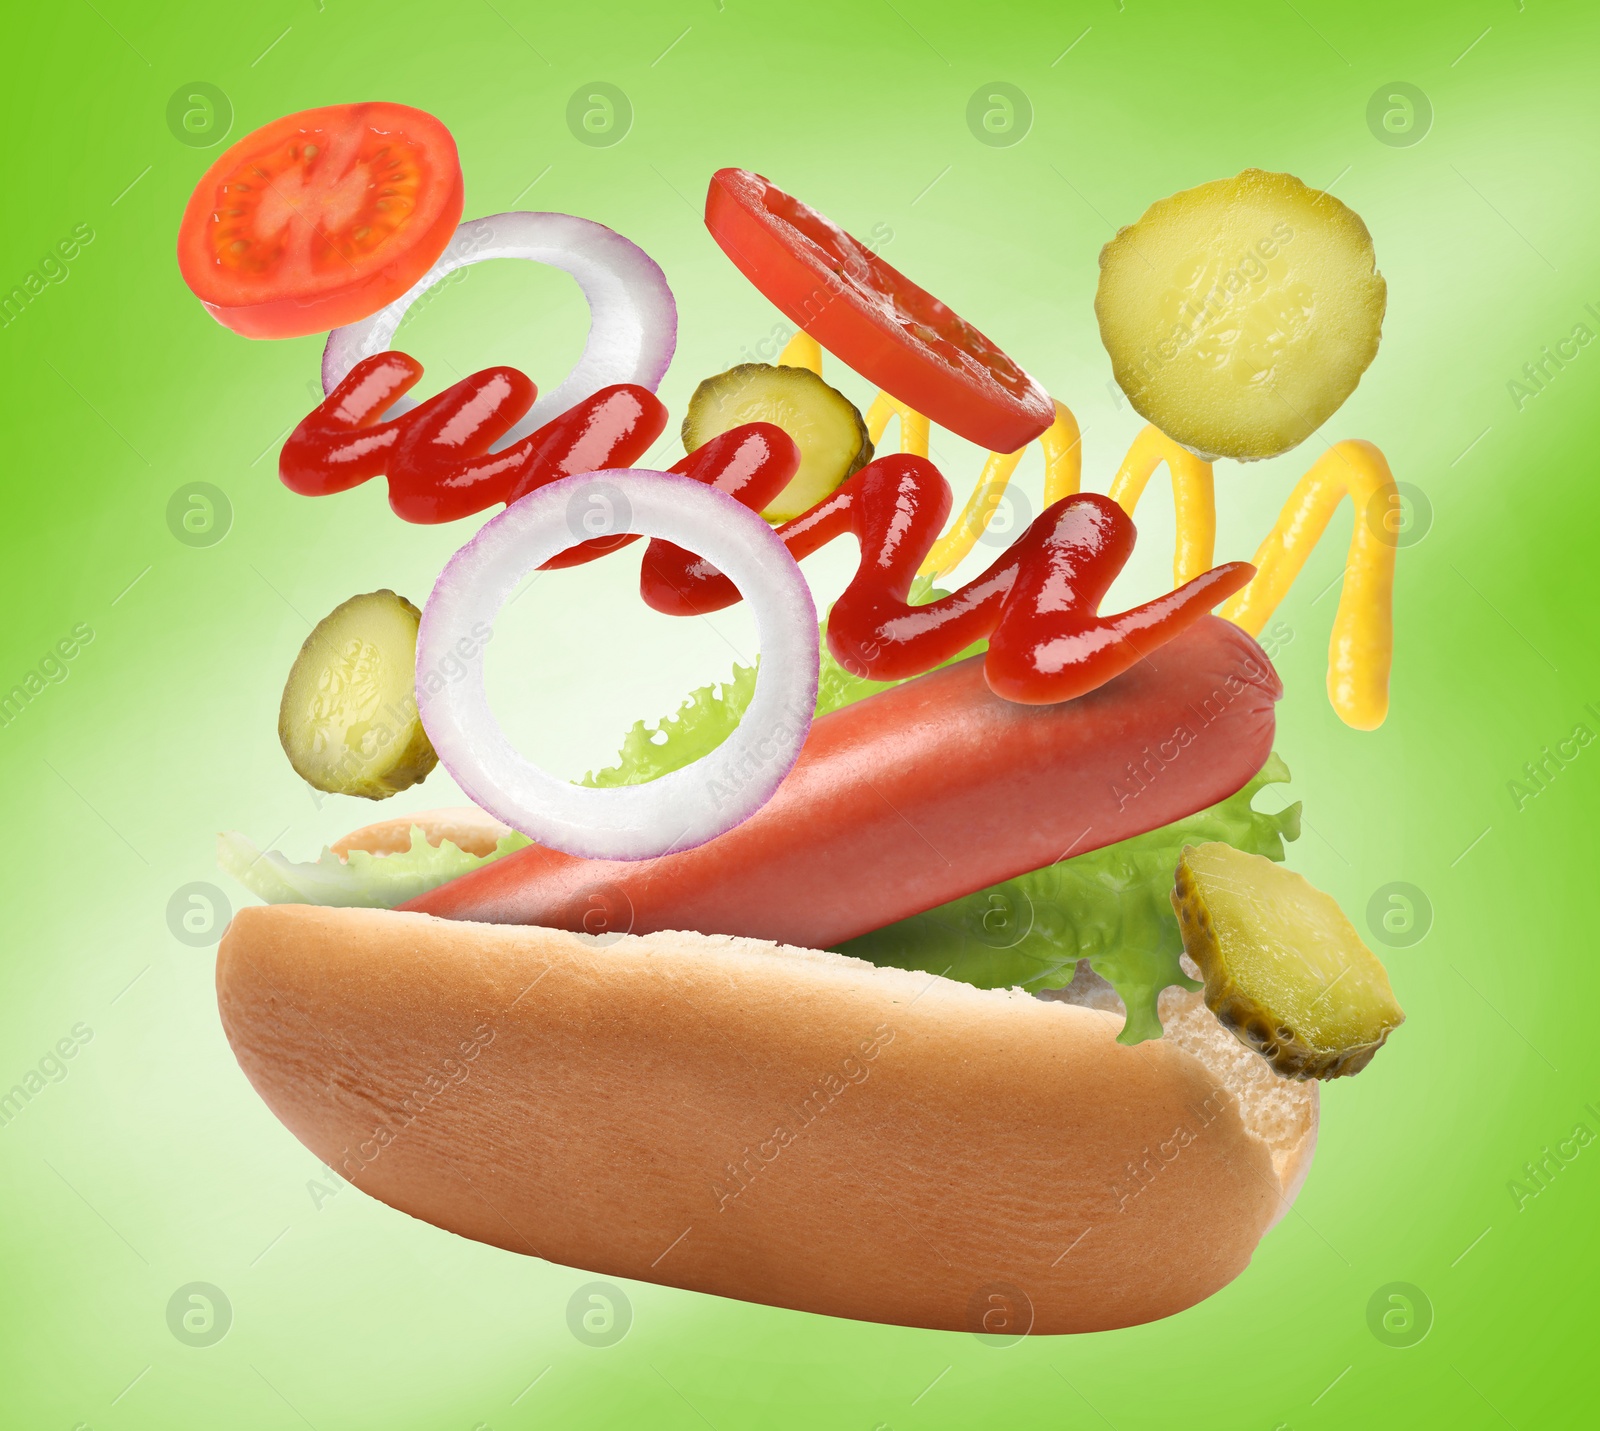 Image of Hot dog ingredients in air on green gradient background